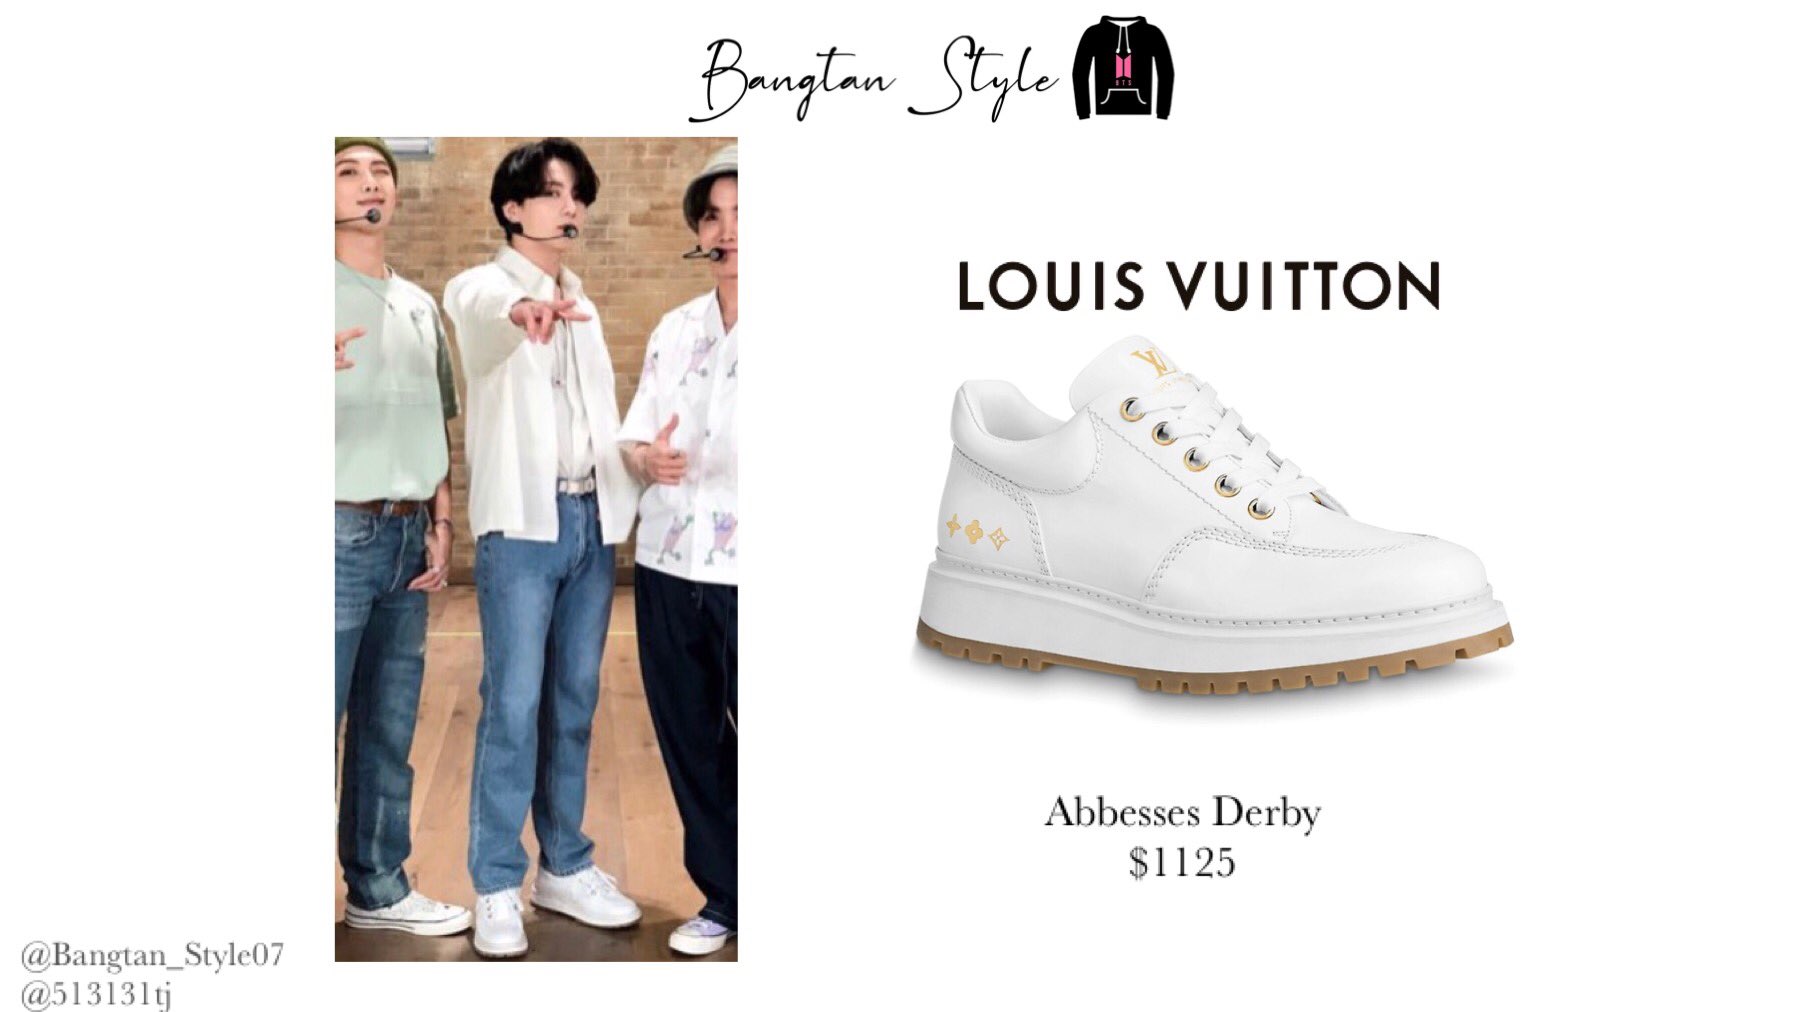 Bangtan Style⁷ (slow) on X: Twitter Post 210918 Jungkook wears LOUIS  VUITTON and WOOYOUNGMI. #JUNGKOOK #BTS @BTS_twt  / X